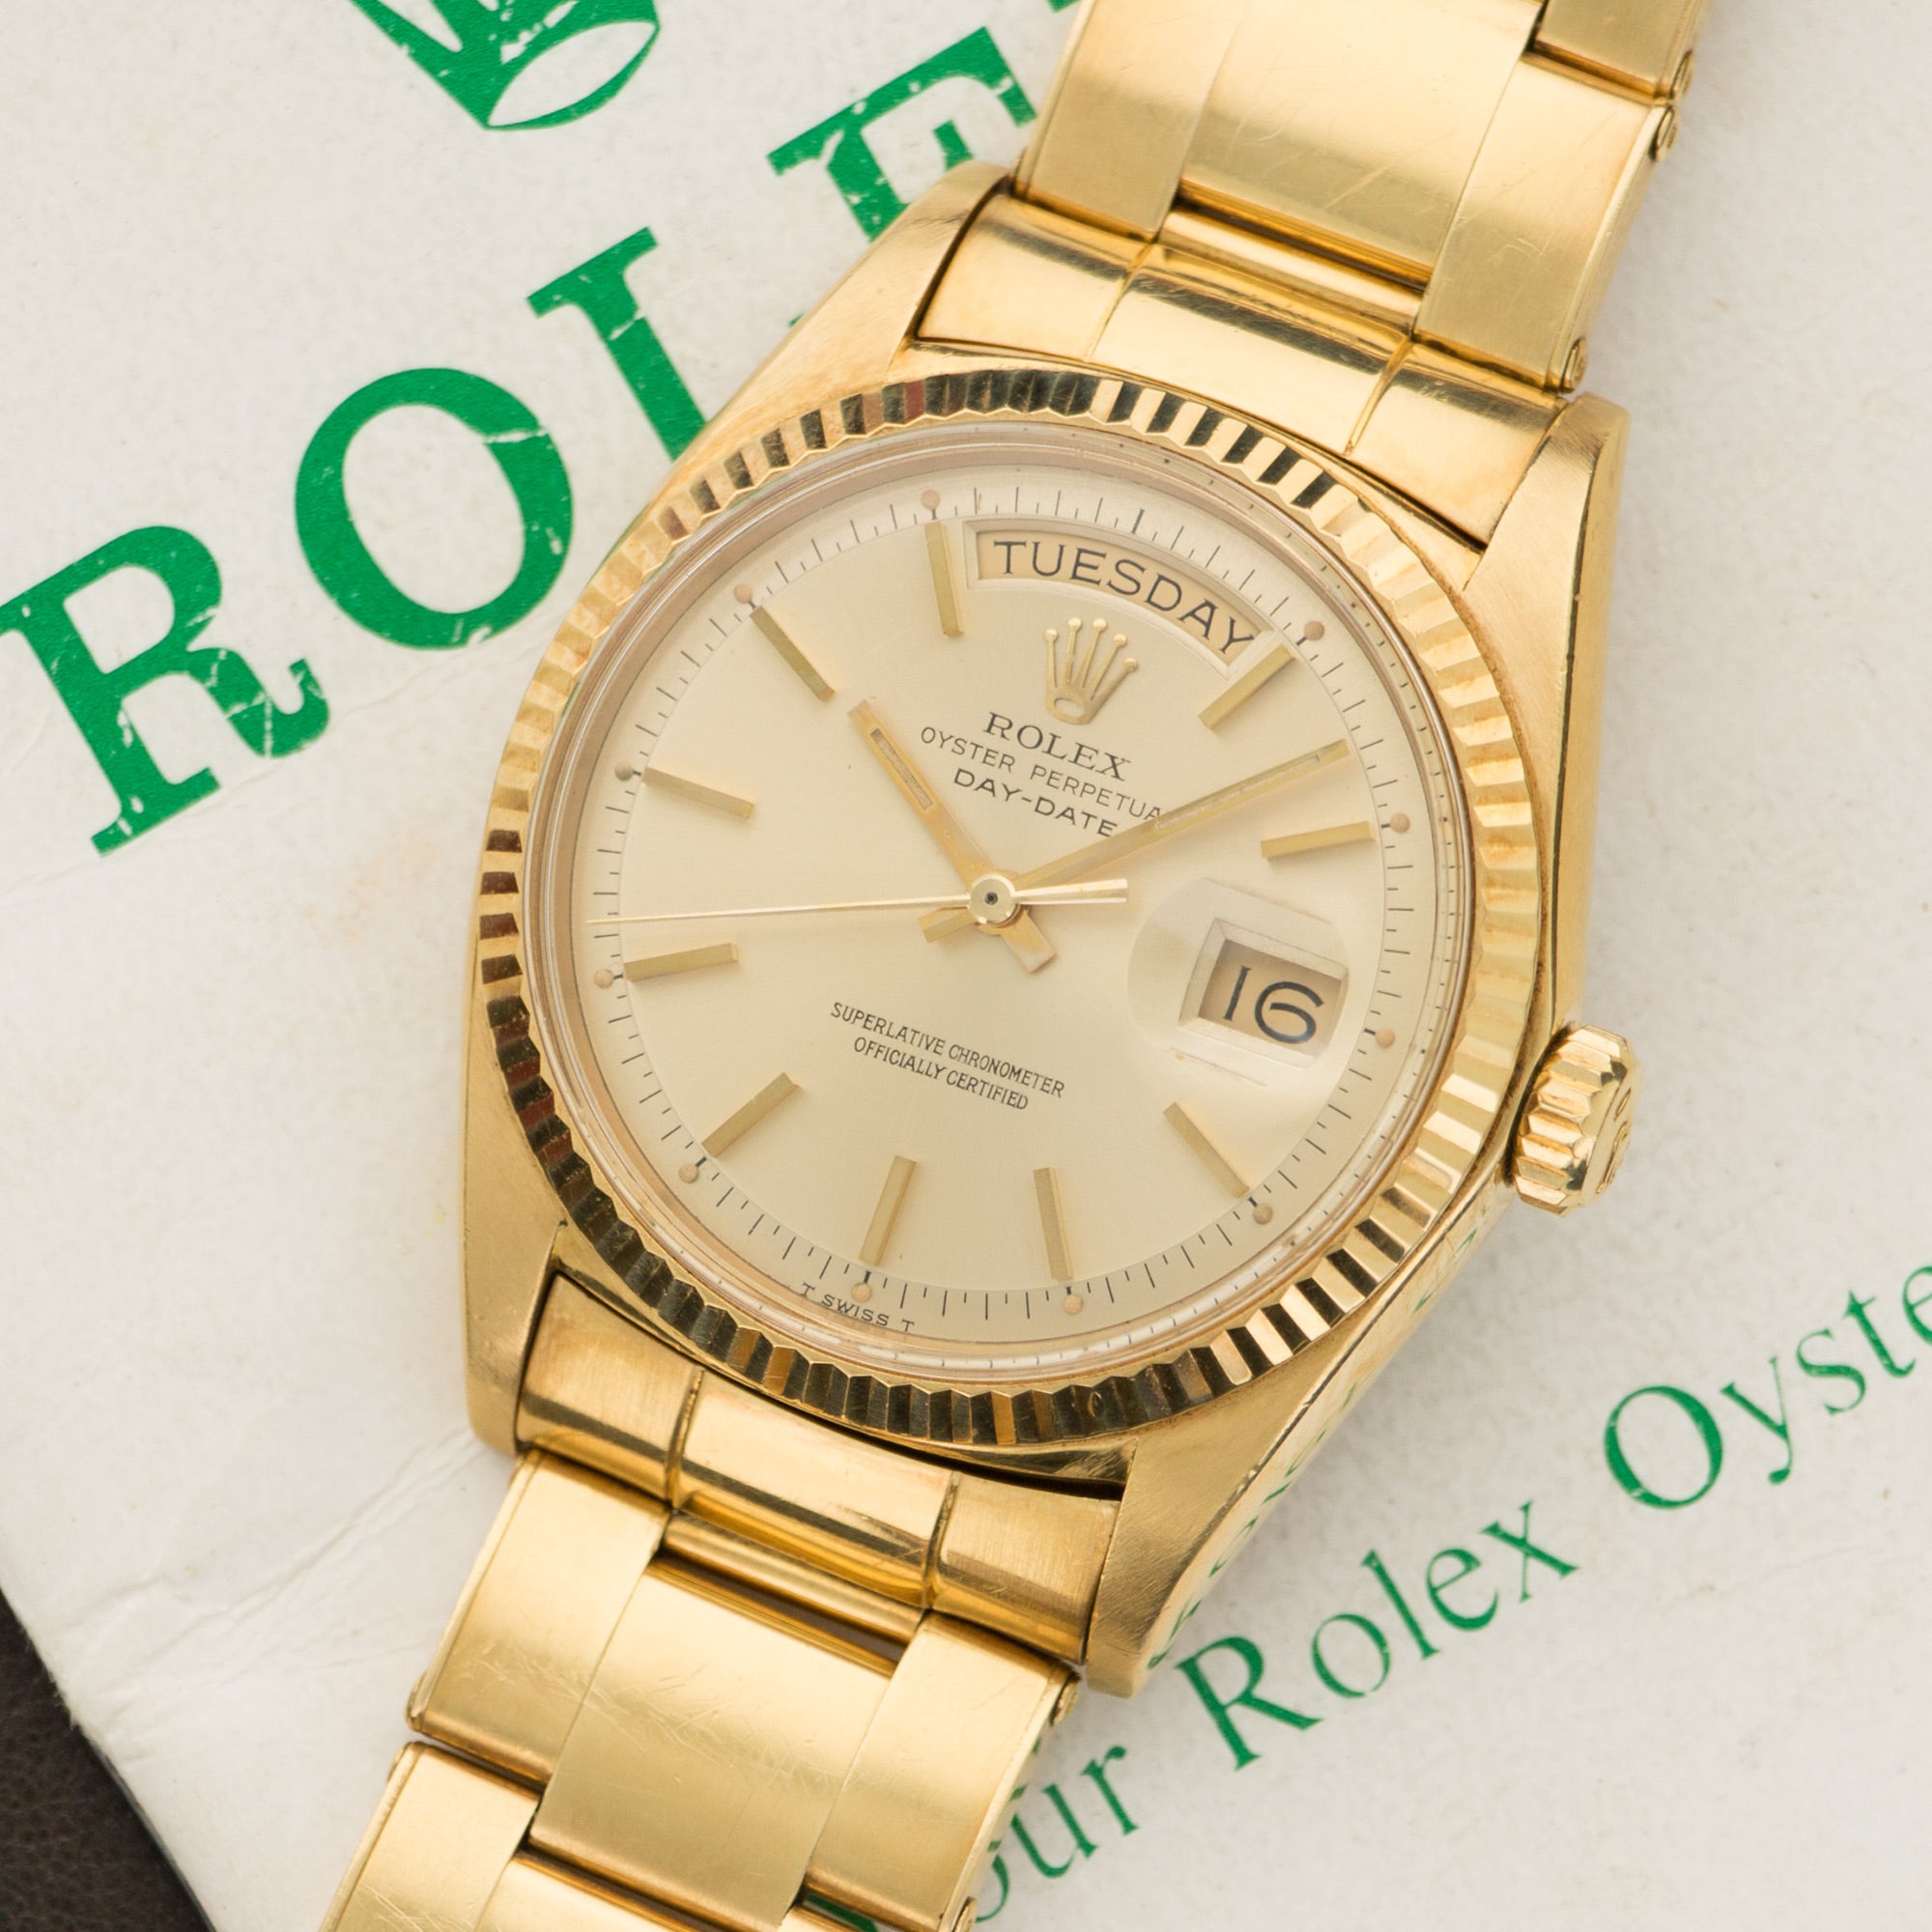 Rolex - Rolex Yellow Gold Day-Date Watch Ref. 1803 with Original Booklet - The Keystone Watches